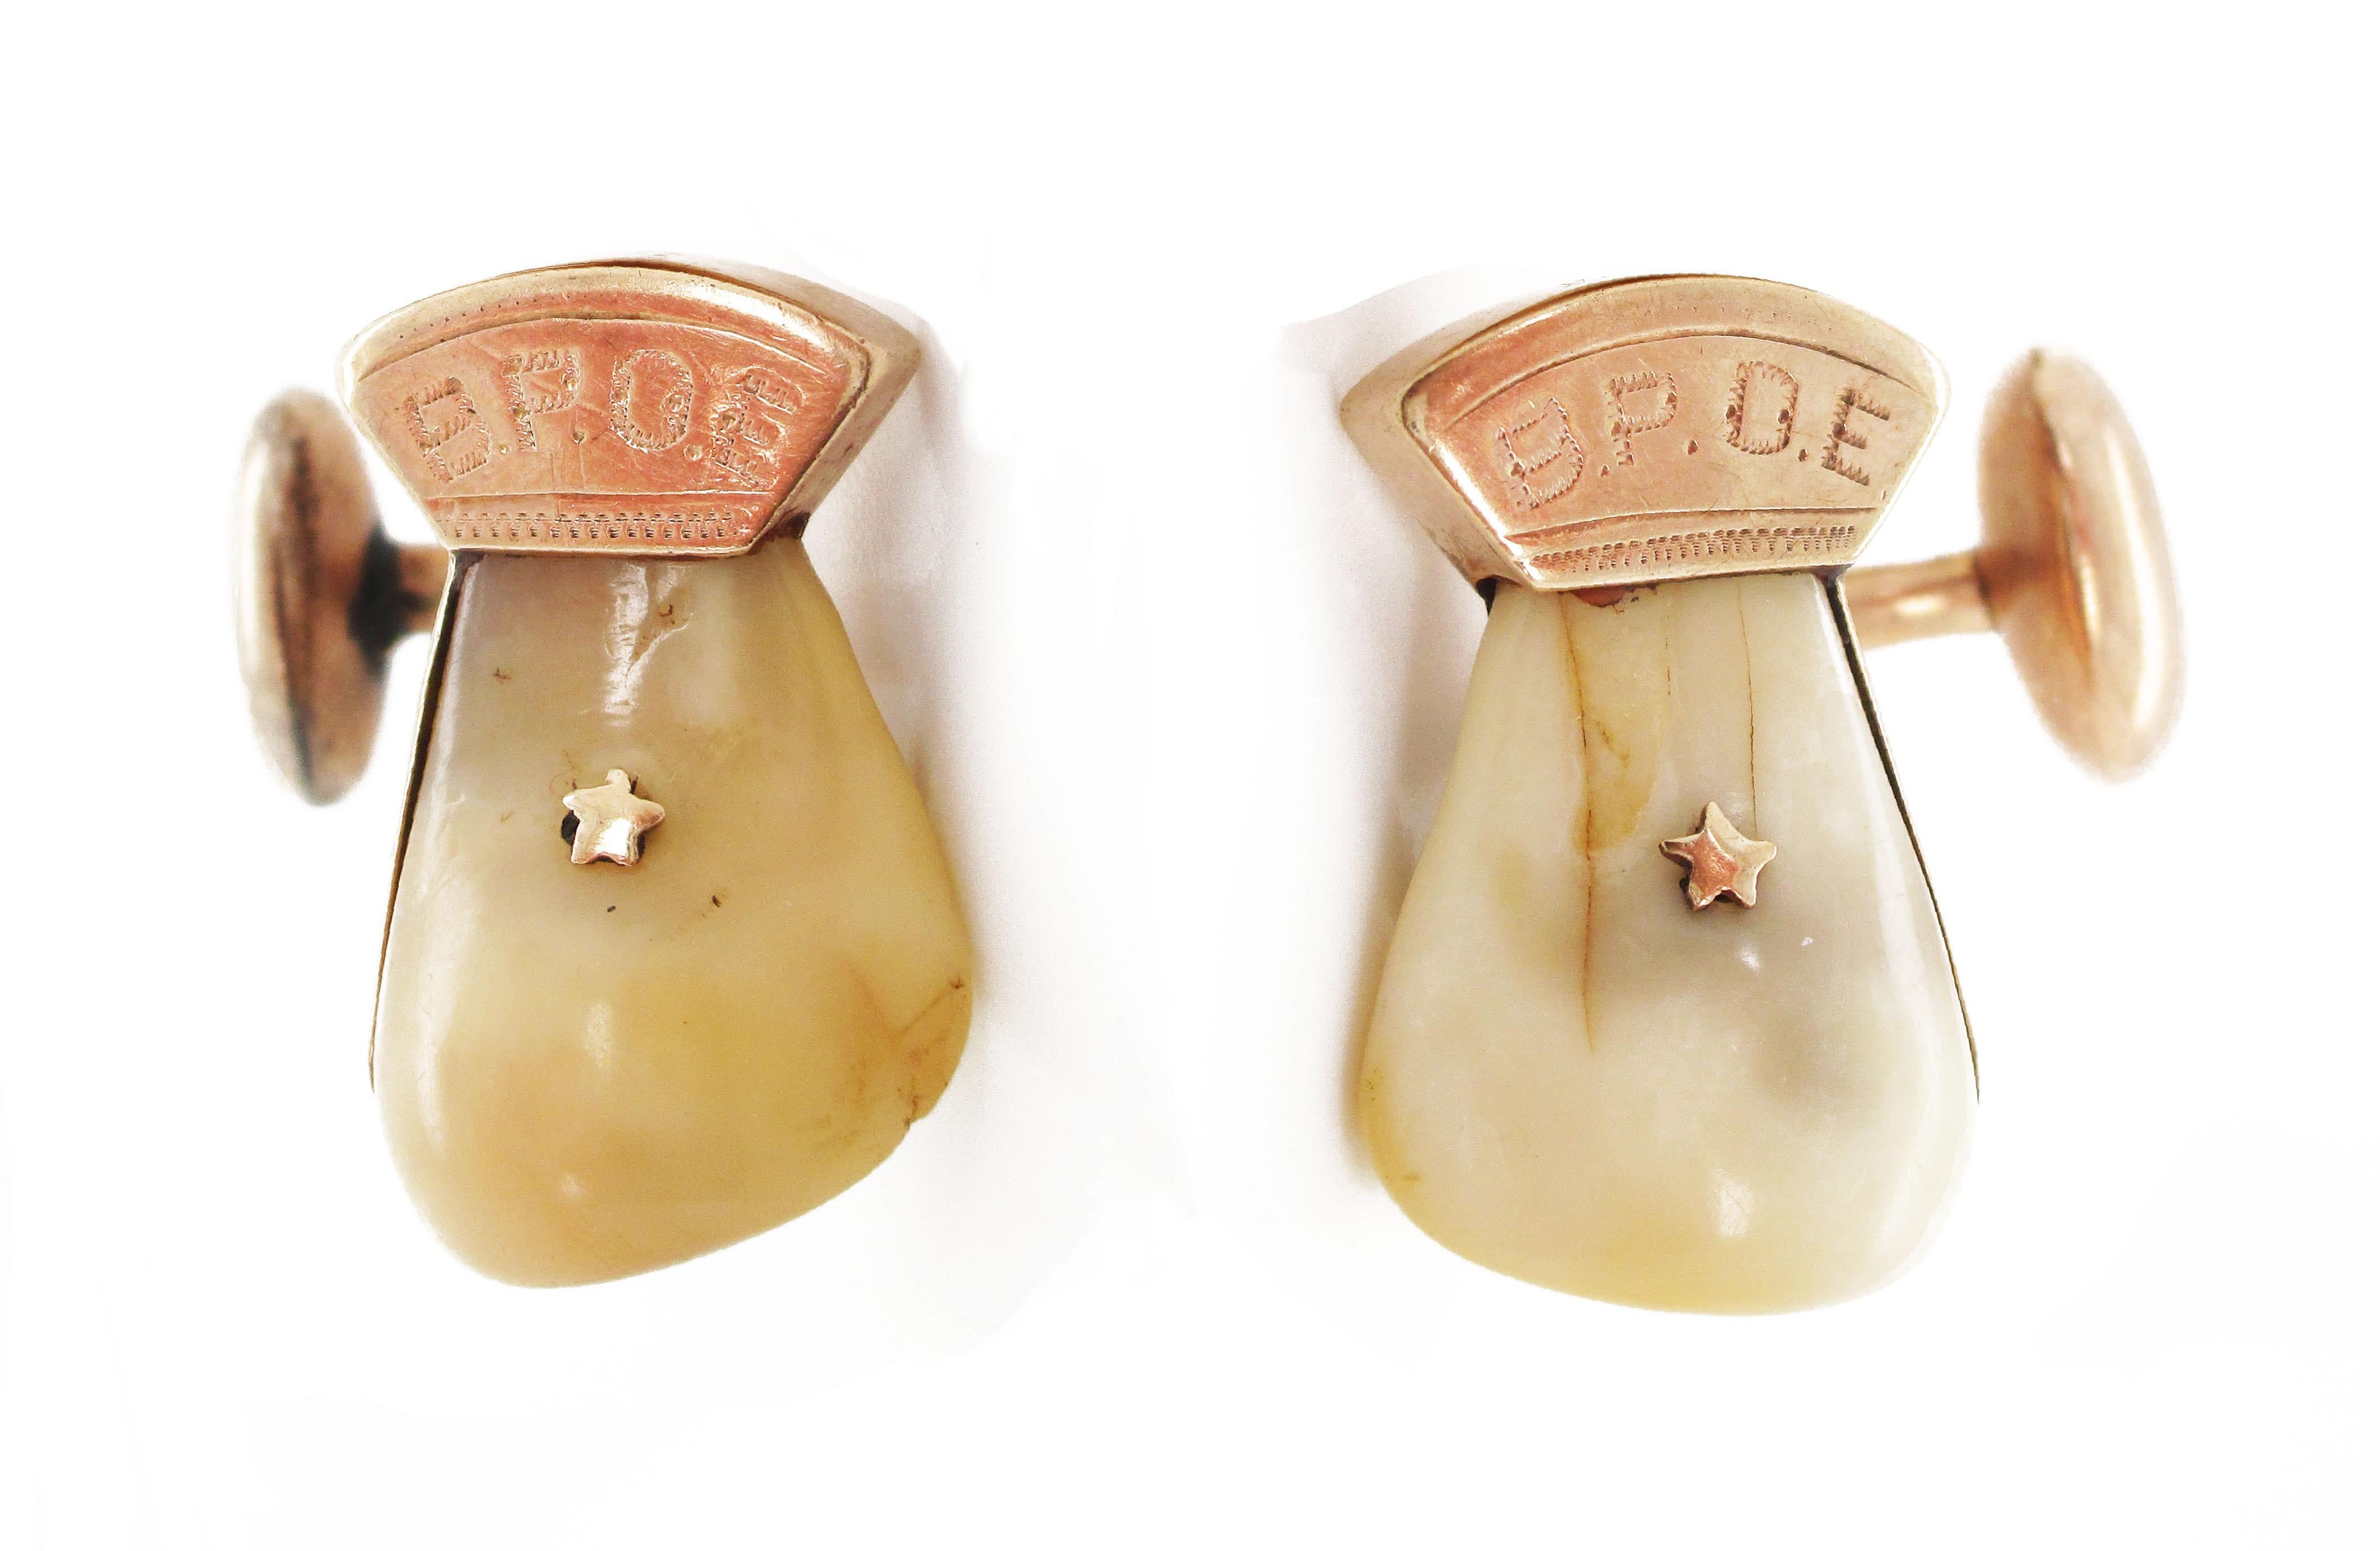 These remarkably unique cufflinks feature rich 14k rose gold and an elk tooth center that combine to create a look of rugged sophistication that is almost unsurpassed! The juxtaposition of rose gold securing the ivory of the elk tooth makes these